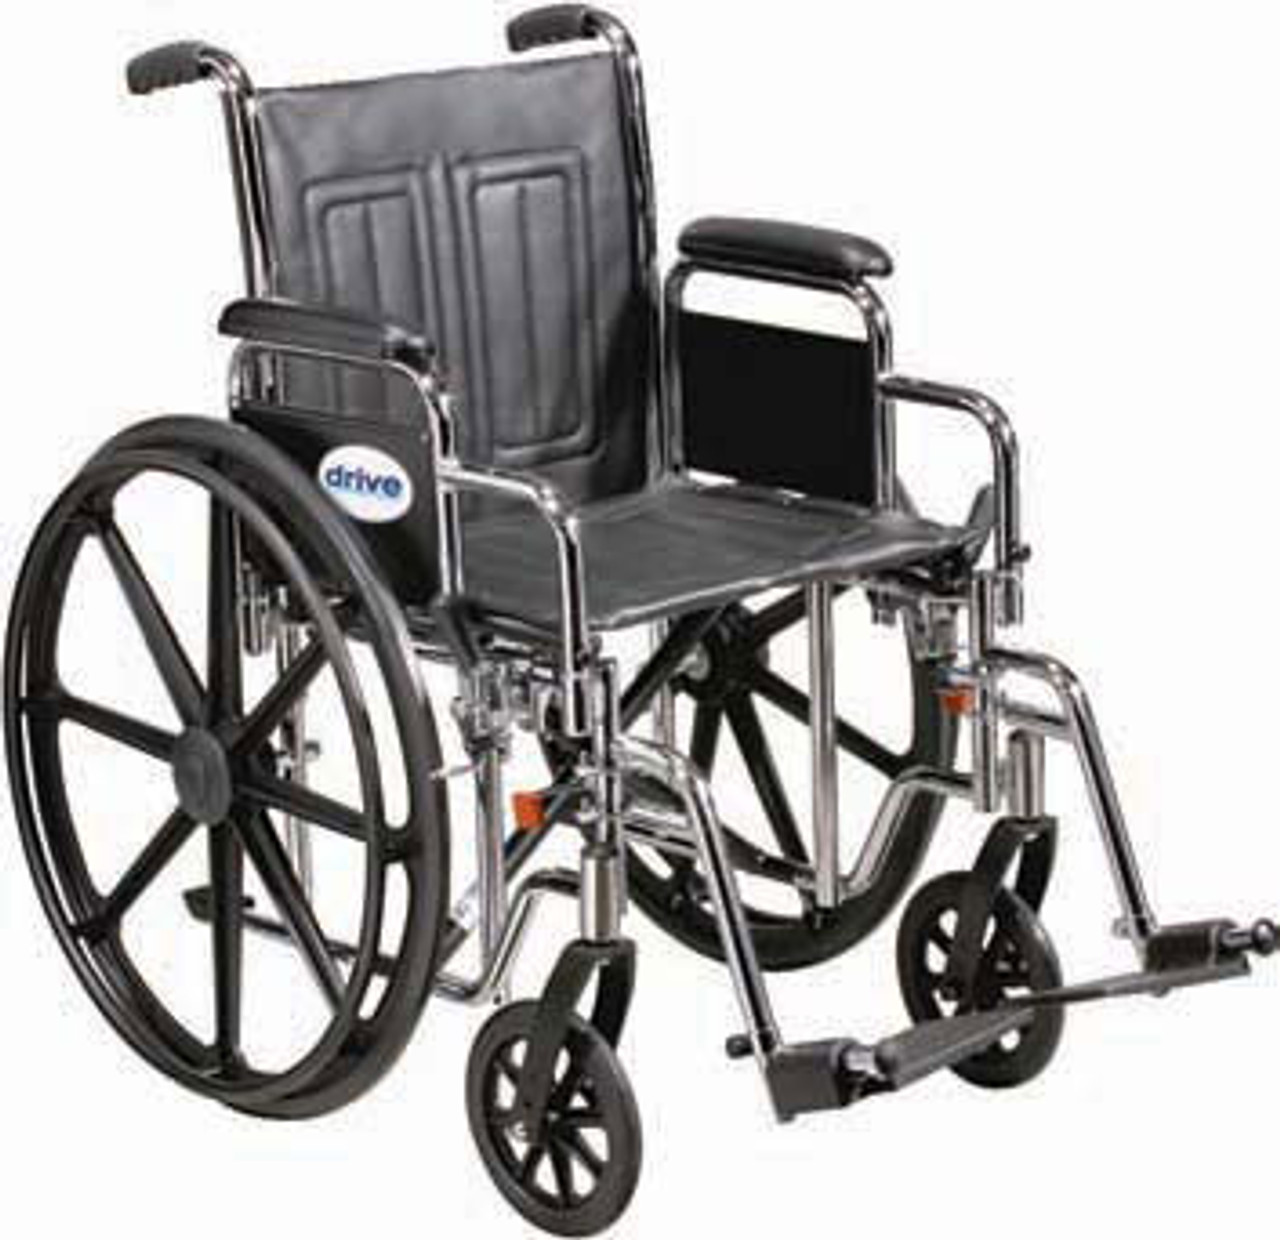 Lightweight Wheelchair with Elevated Foot Rest